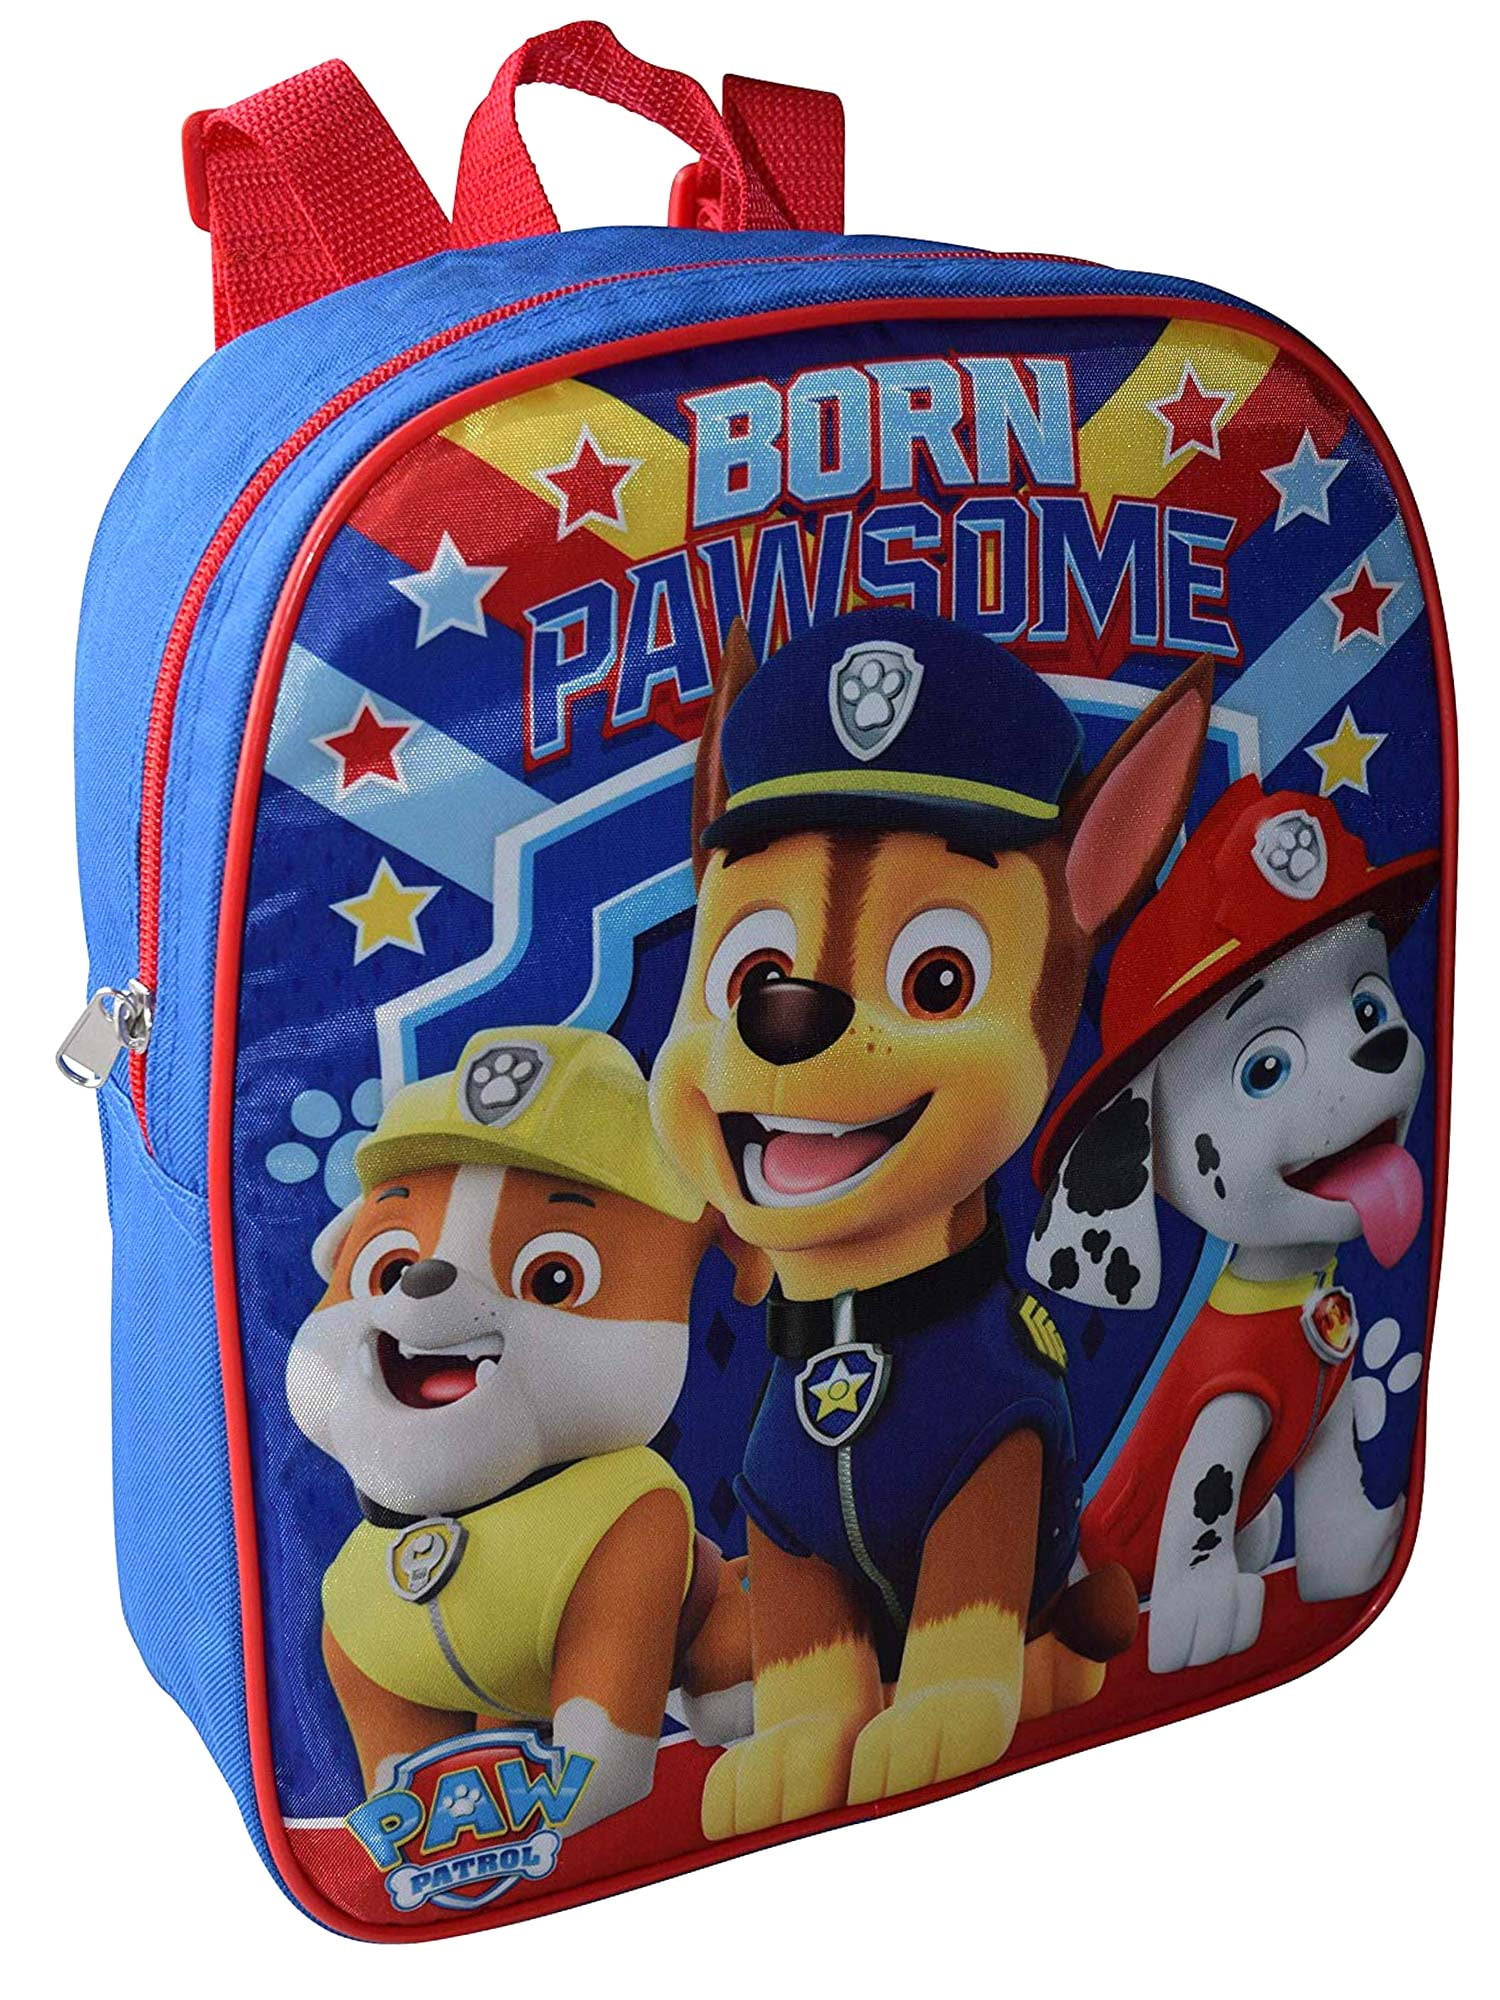 Kids Paw Patrol Backpack Game On with Big Pocket Chase Marshall Rubble School Nursery Holiday Lunch Book Bag Rucksack